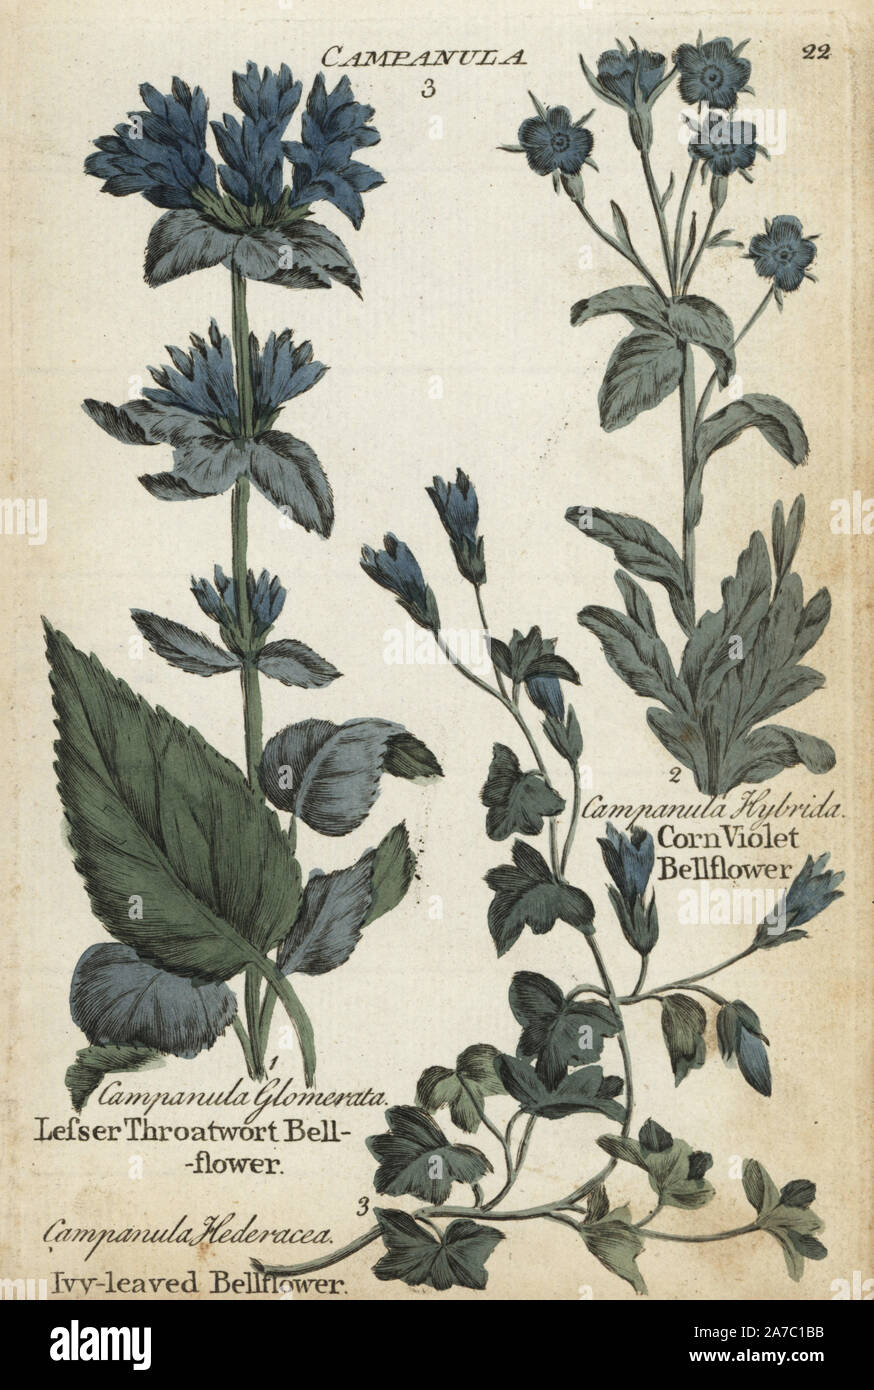 Lesser throatwort bellflower, Campanula glomerata, ivy-leaved bellflower, Wahlenbergia hederacea , and corn violet bellflower, Legousia hybrida. Handcoloured botanical copperplate engraving by an unknown artist from 'Culpeper's English Family Physician; or Medical Herbal Enlarged, with Several Hundred Additional Plants, Principally from Sir John Hill,' by Joshua Hamilton, London, W. Locke, 1792. Stock Photo